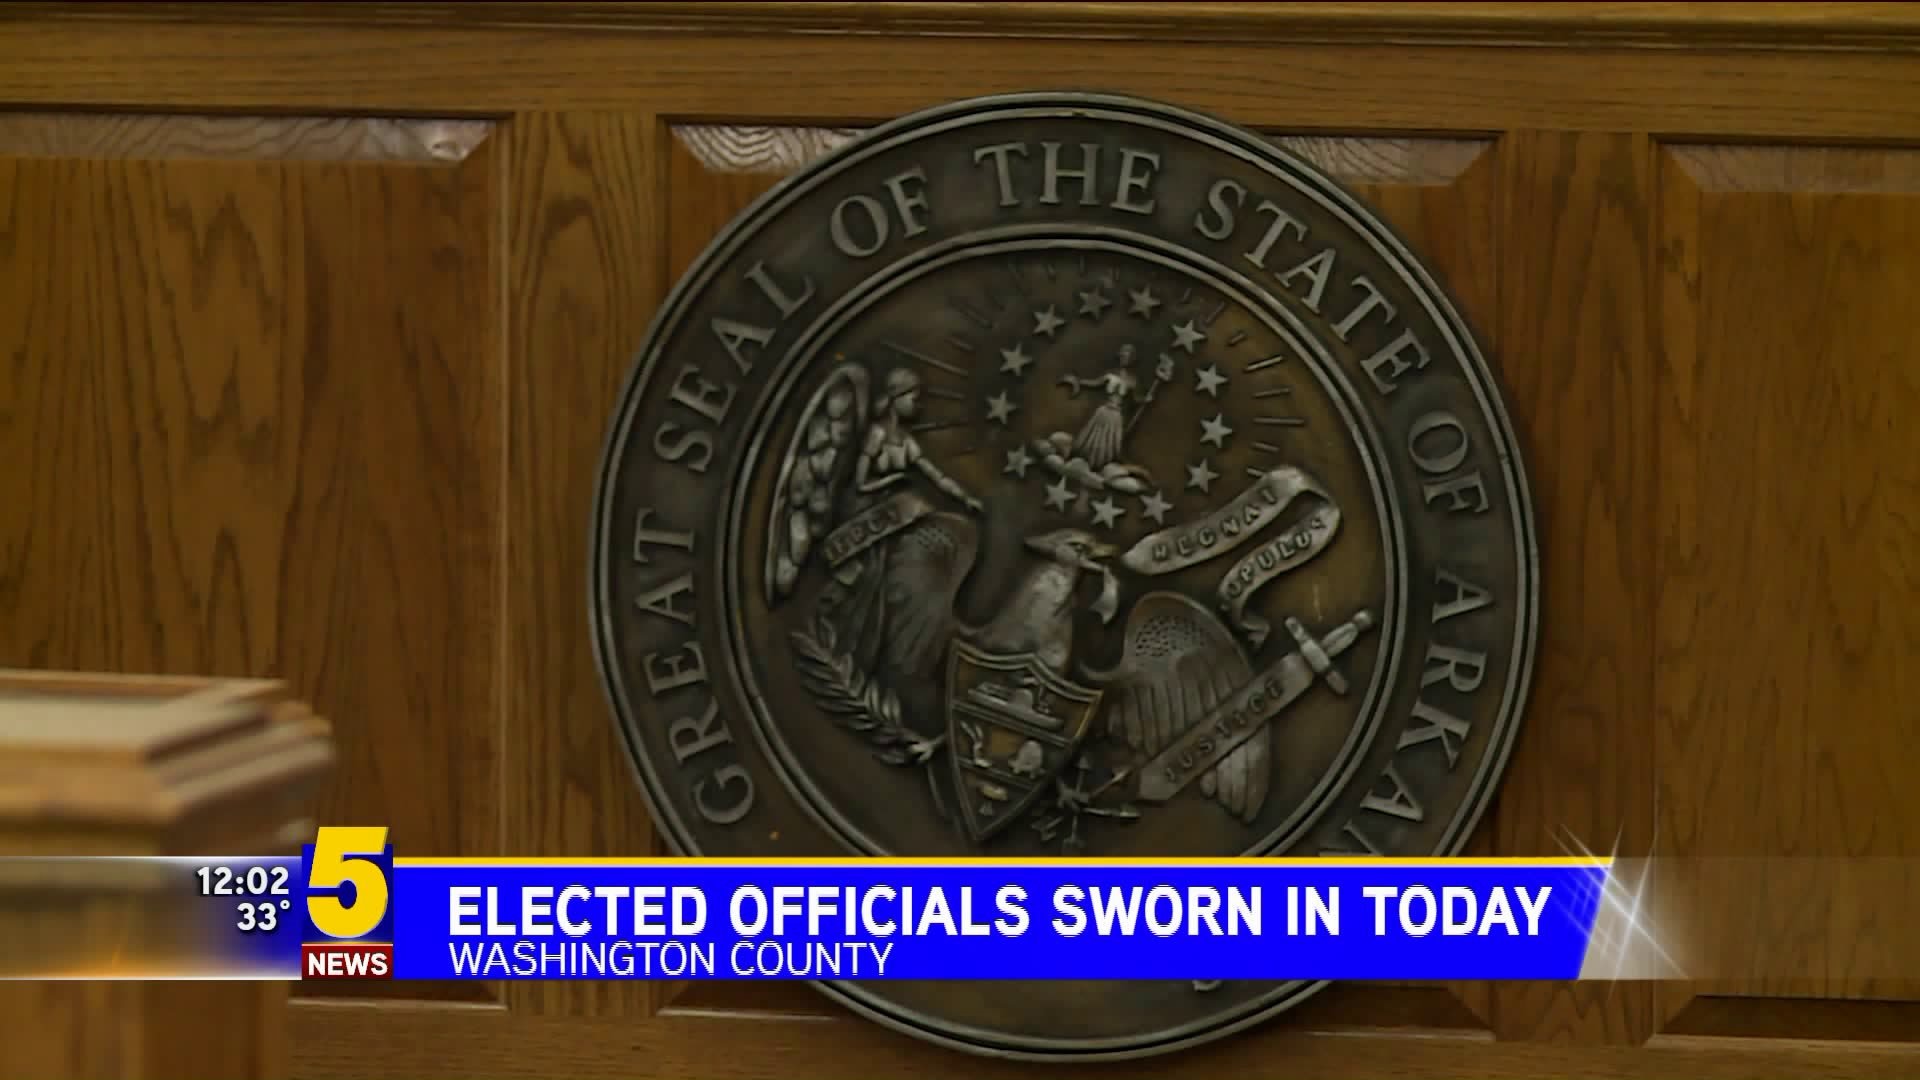 Washington Co. Elected Officals Sworn Into Office